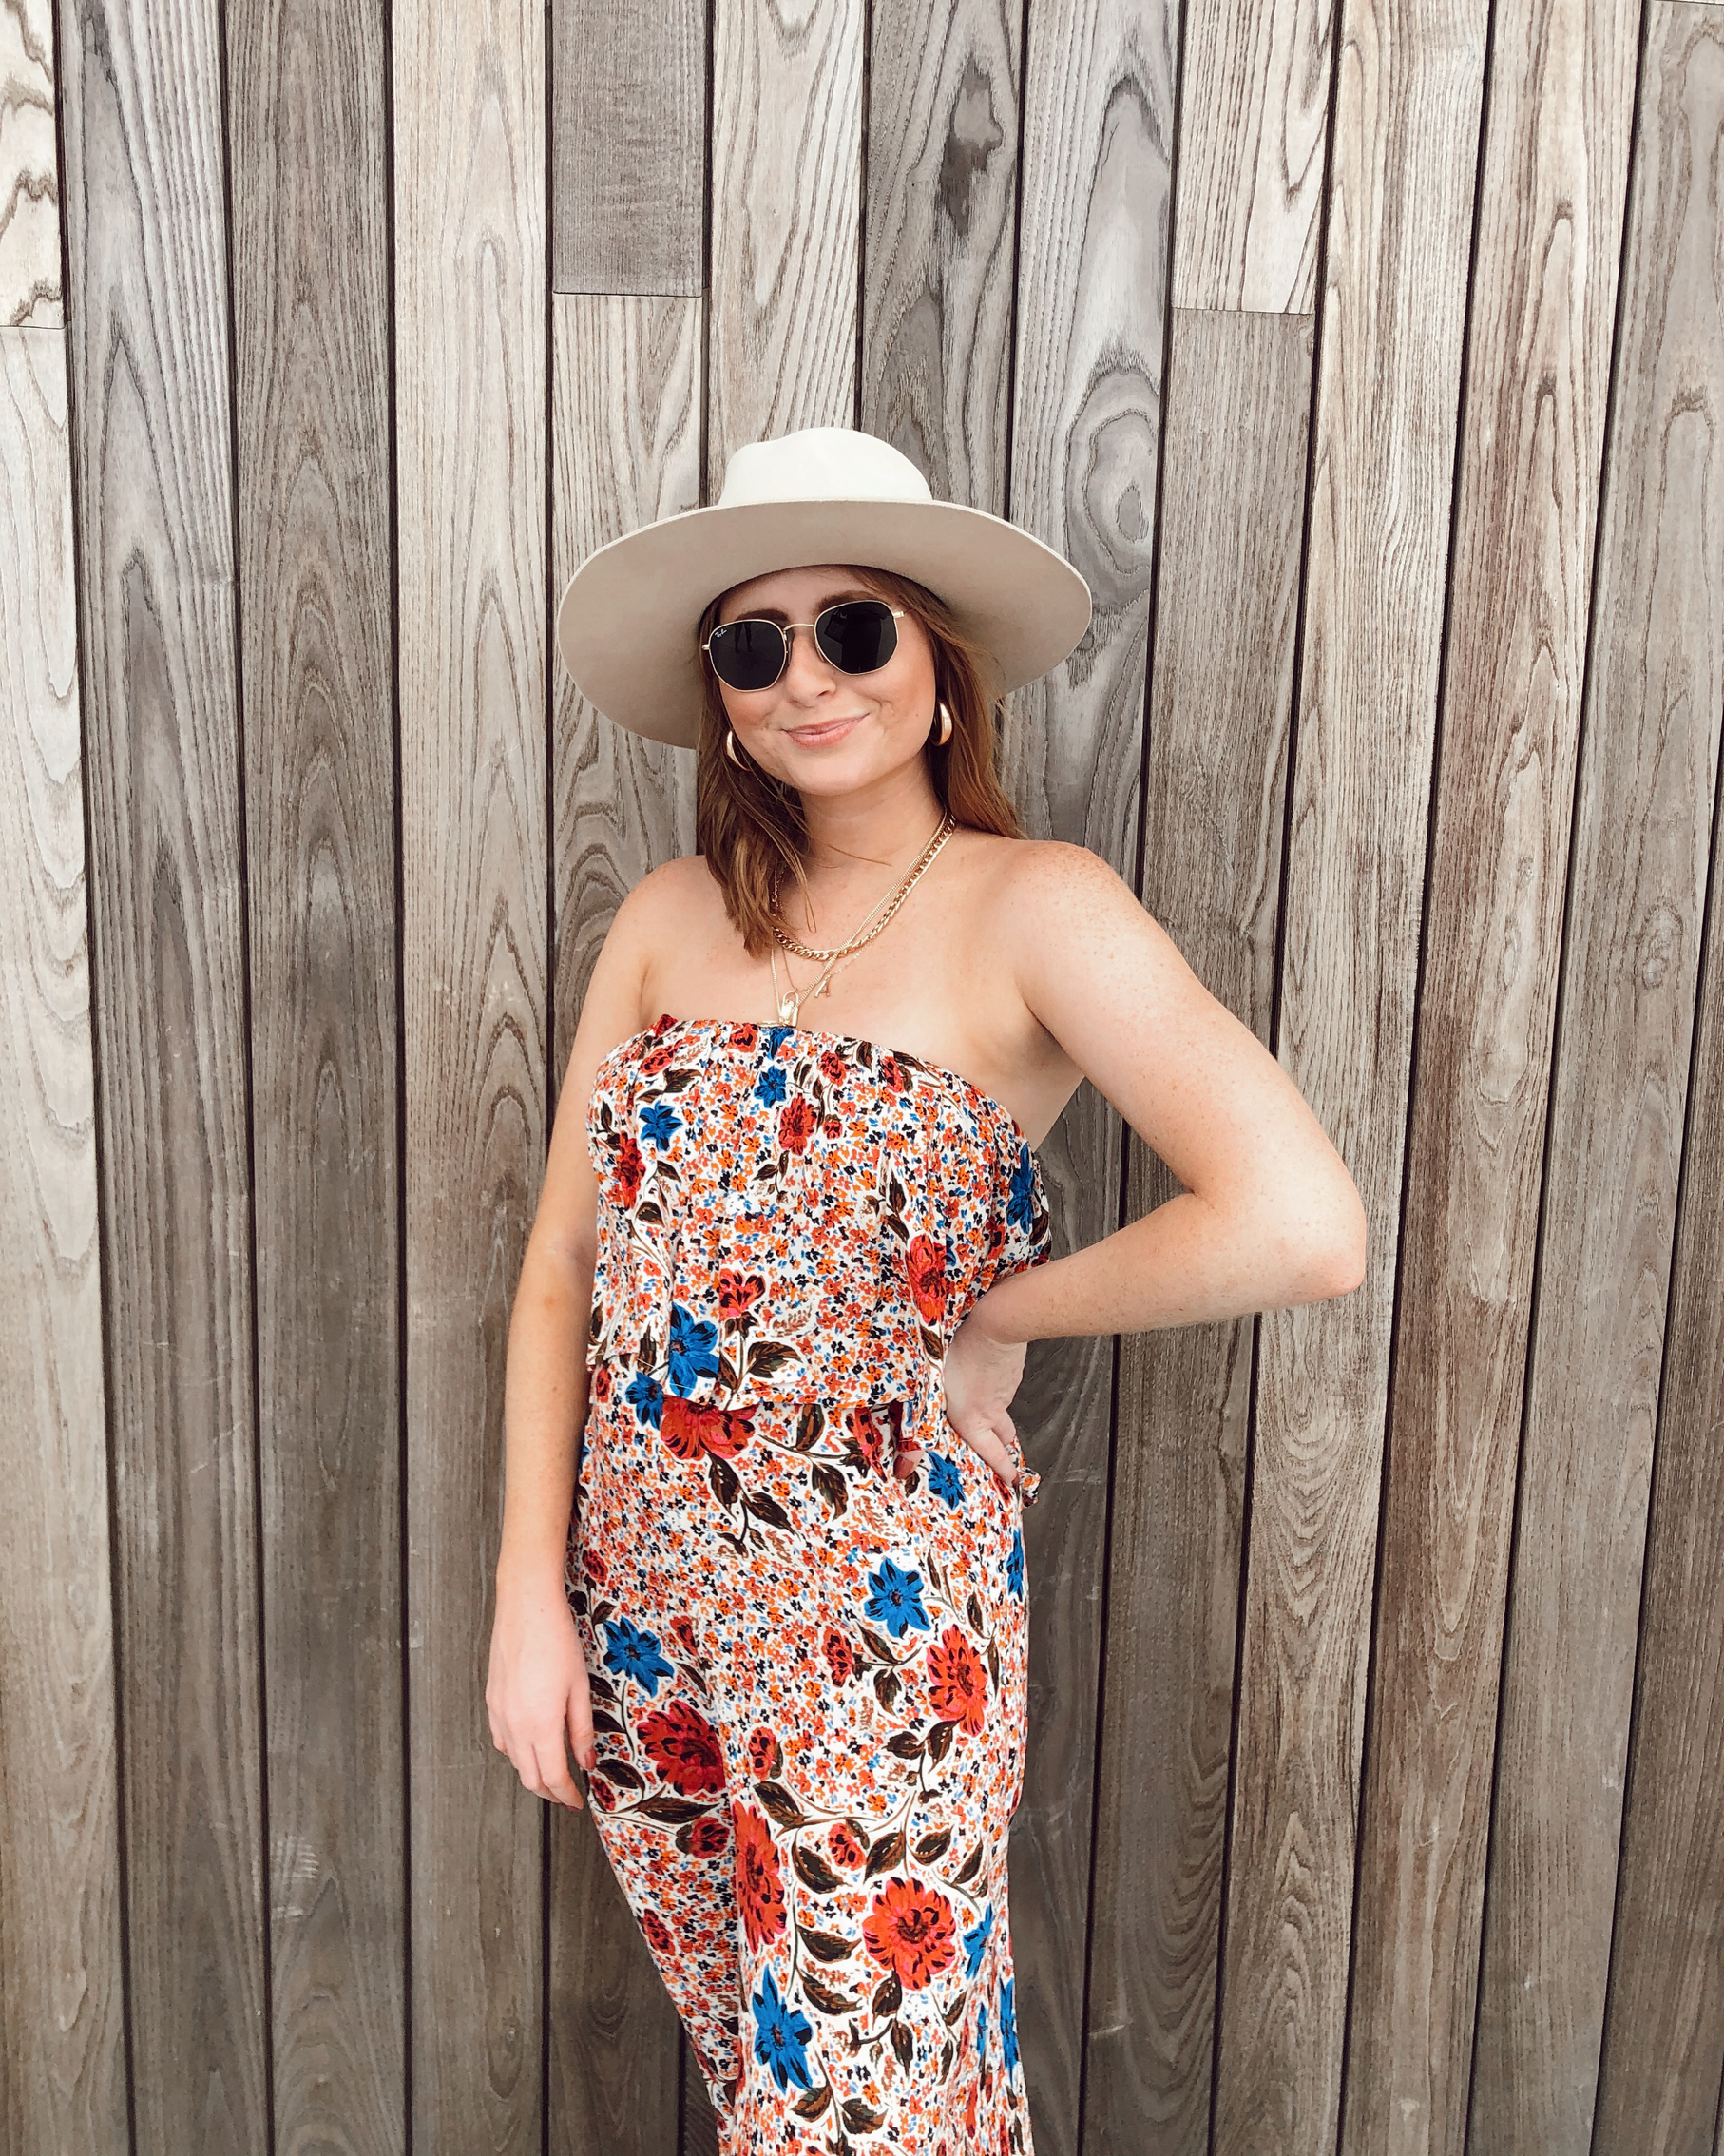 Outfits From Summer to Fall - O'Neill Kyler Flora Jumper - Affordable by Amanda - Summer to Fall Outfits 2020 - Transition Wardrobe from Summer to Fall - Summer to Fall Outfit Ideas 2020 - Cute Fall 2020 Outfit Ideas